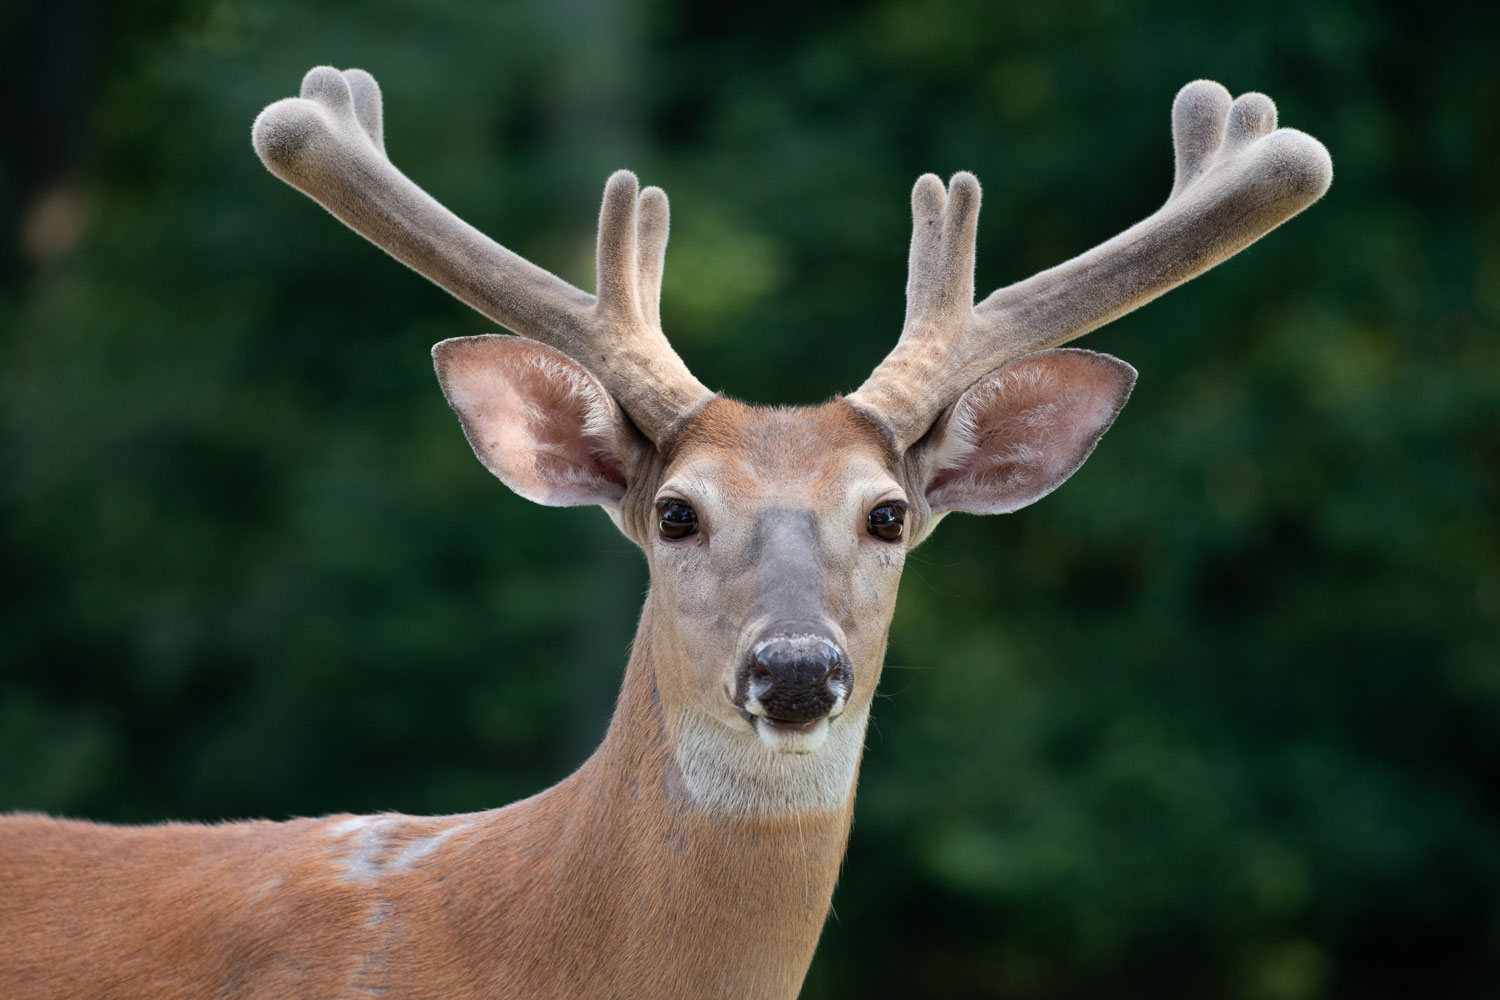 Nature curiosity: How do antlers grow so fast?